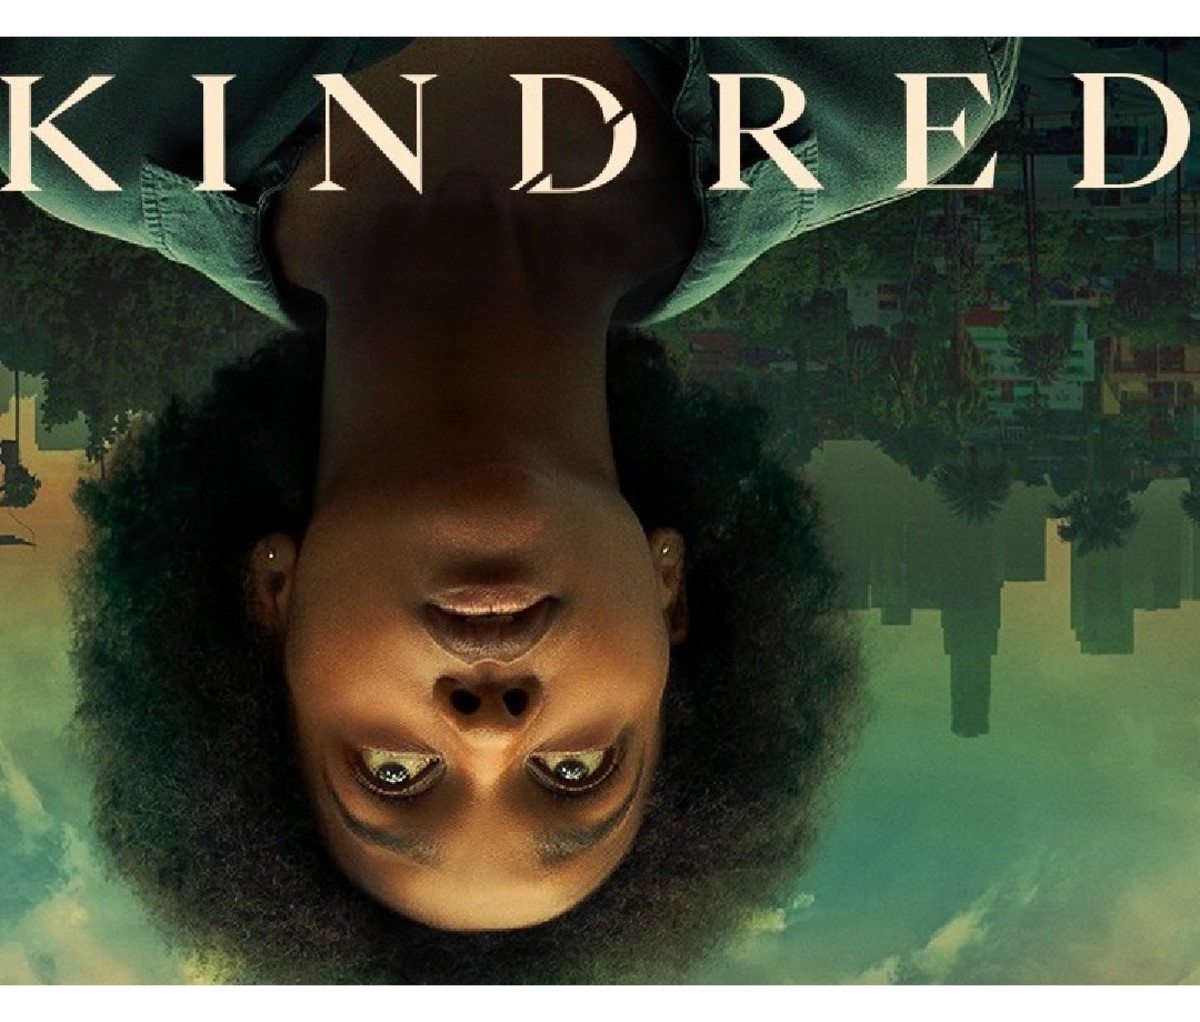 Poster for the TV show Kindred.